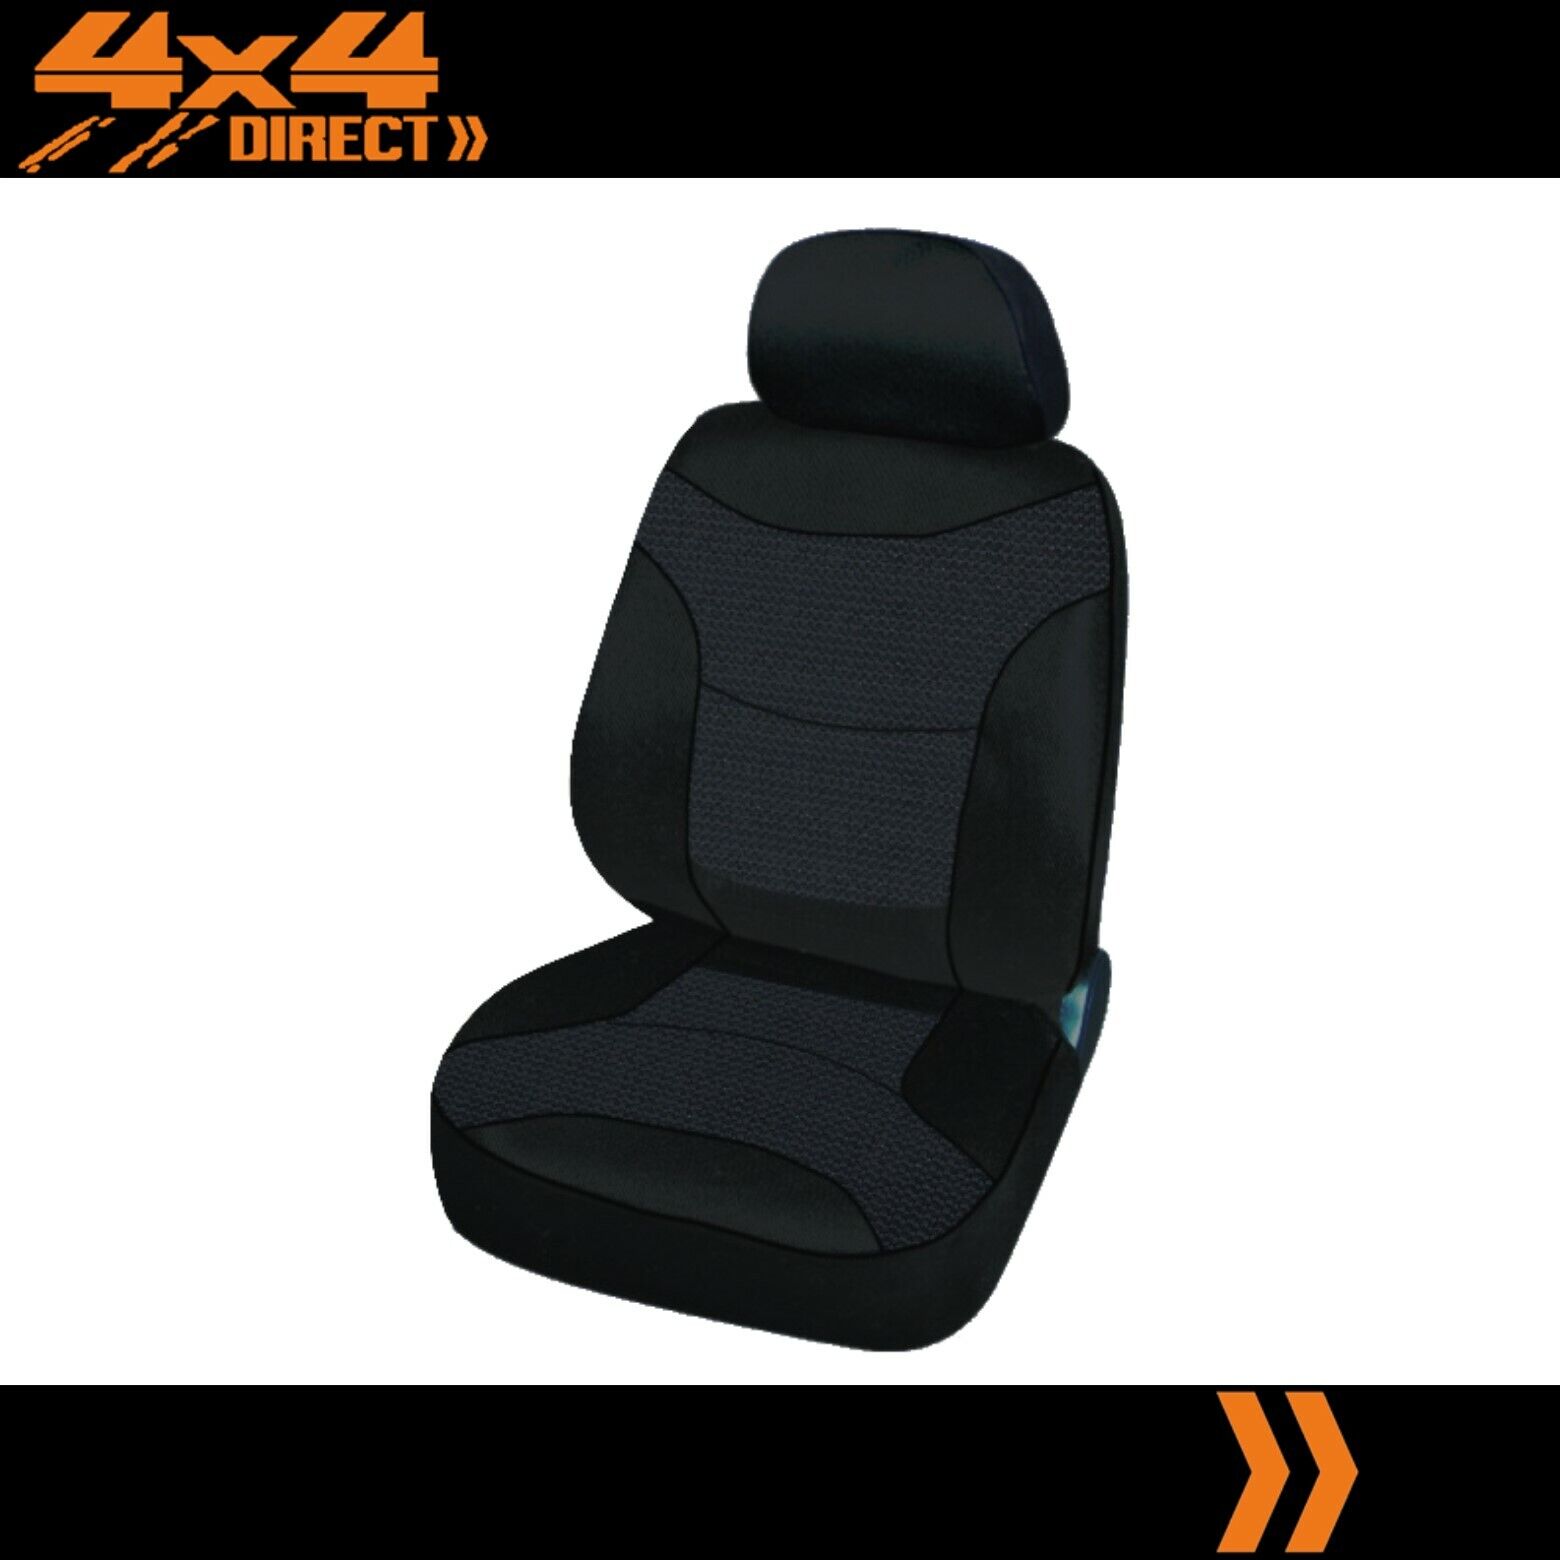 SINGLE BLACK MODERN JACQUARD SEAT COVER FOR FORD CORTINA